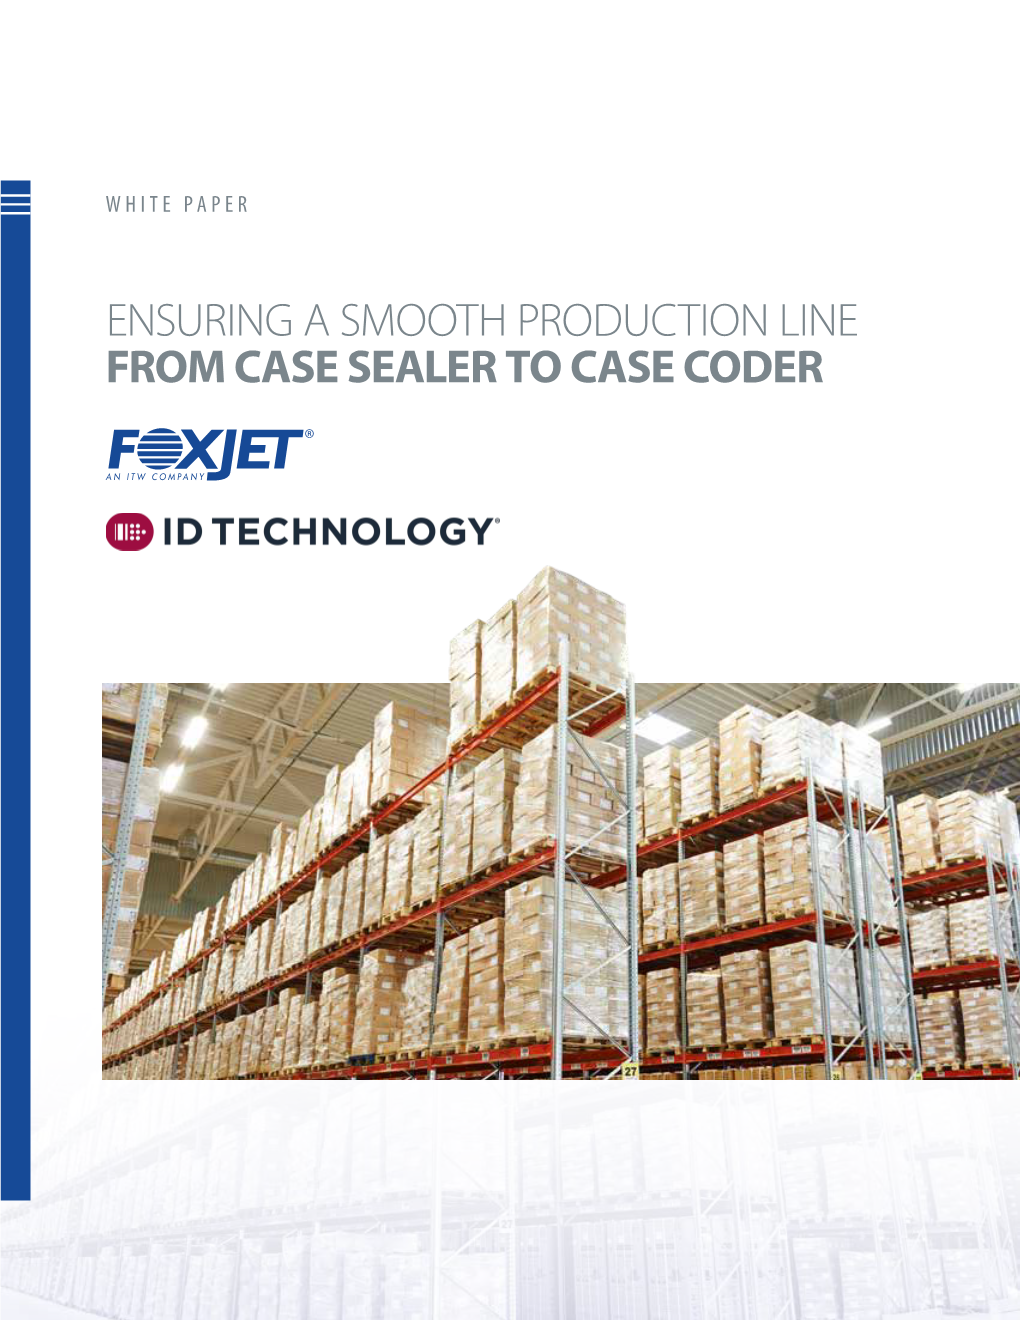 Ensuring a Smooth Production Line from Case Sealer to Case Coder Forward